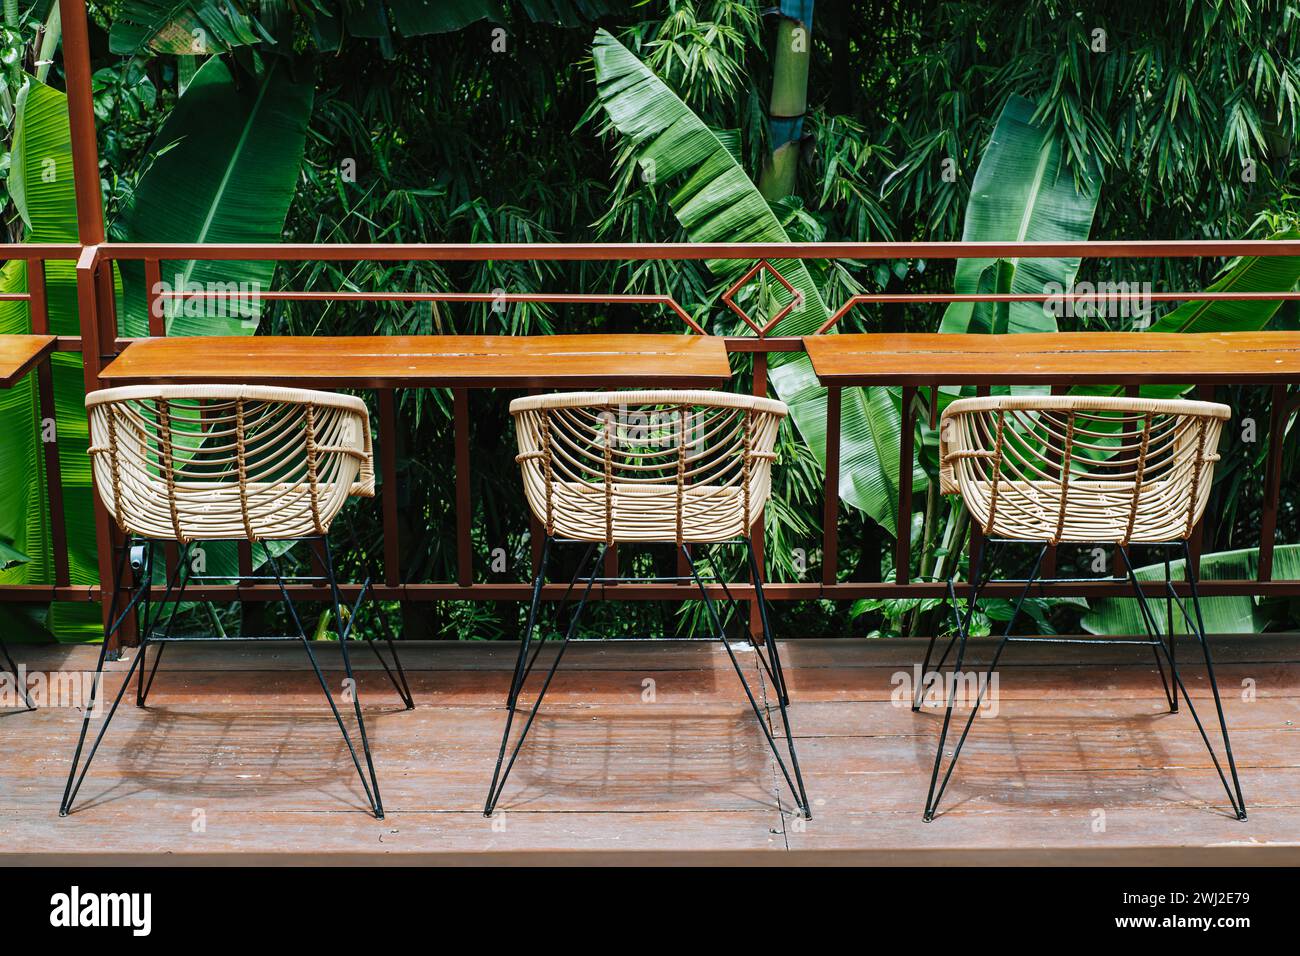 Outdoor wooden long table setting with woven chairs surrounded by lush green plants. Tropical cafe concept. Stock Photo